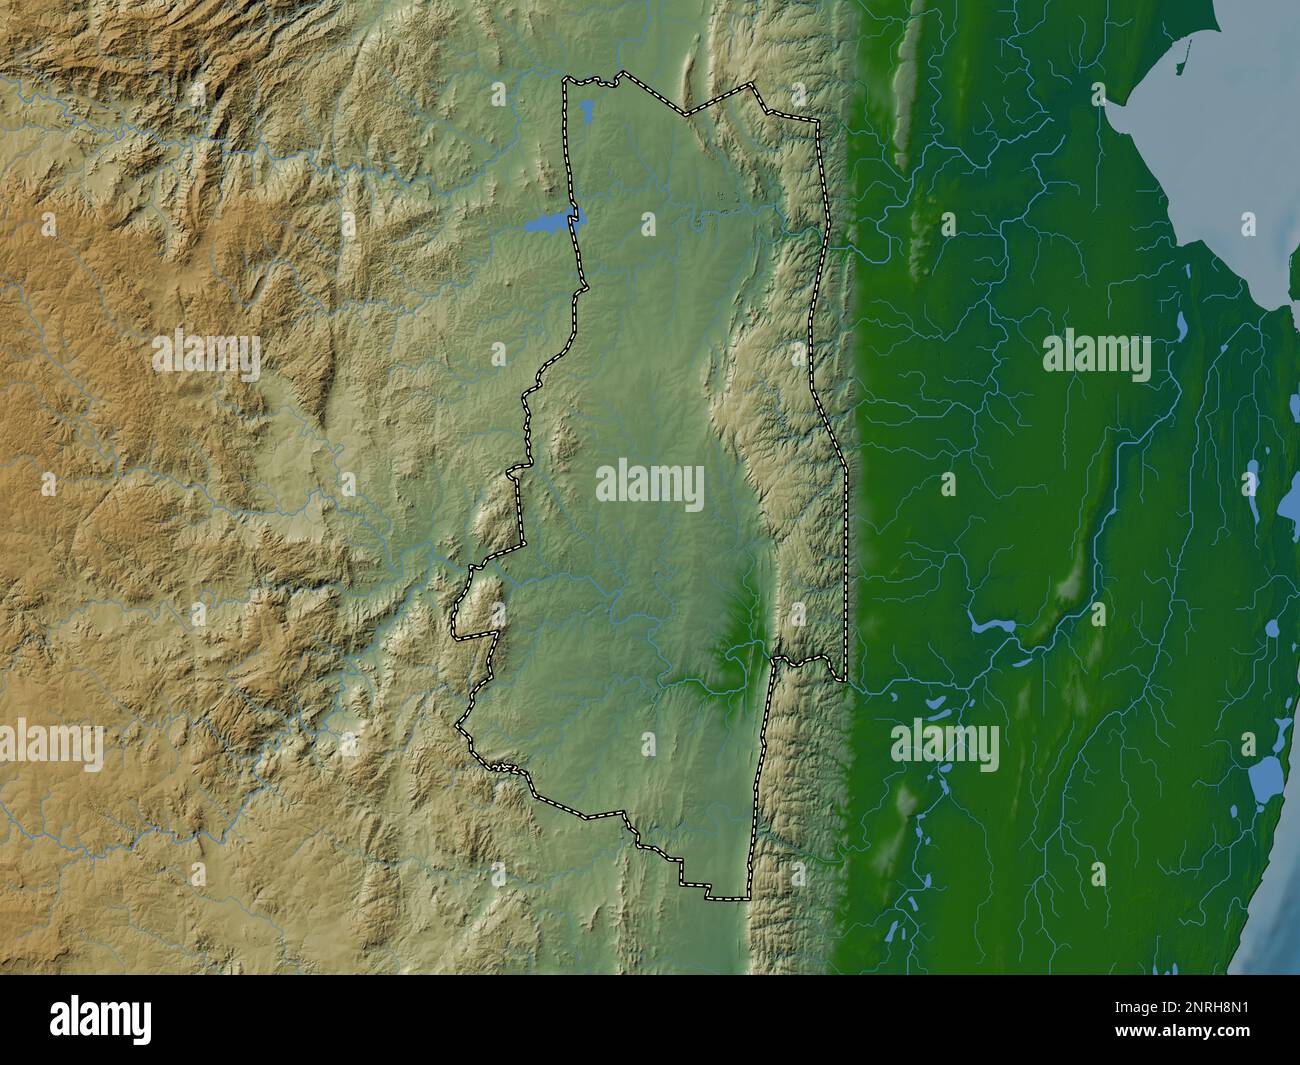 Lubombo, district of Eswatini. Colored elevation map with lakes and rivers Stock Photo